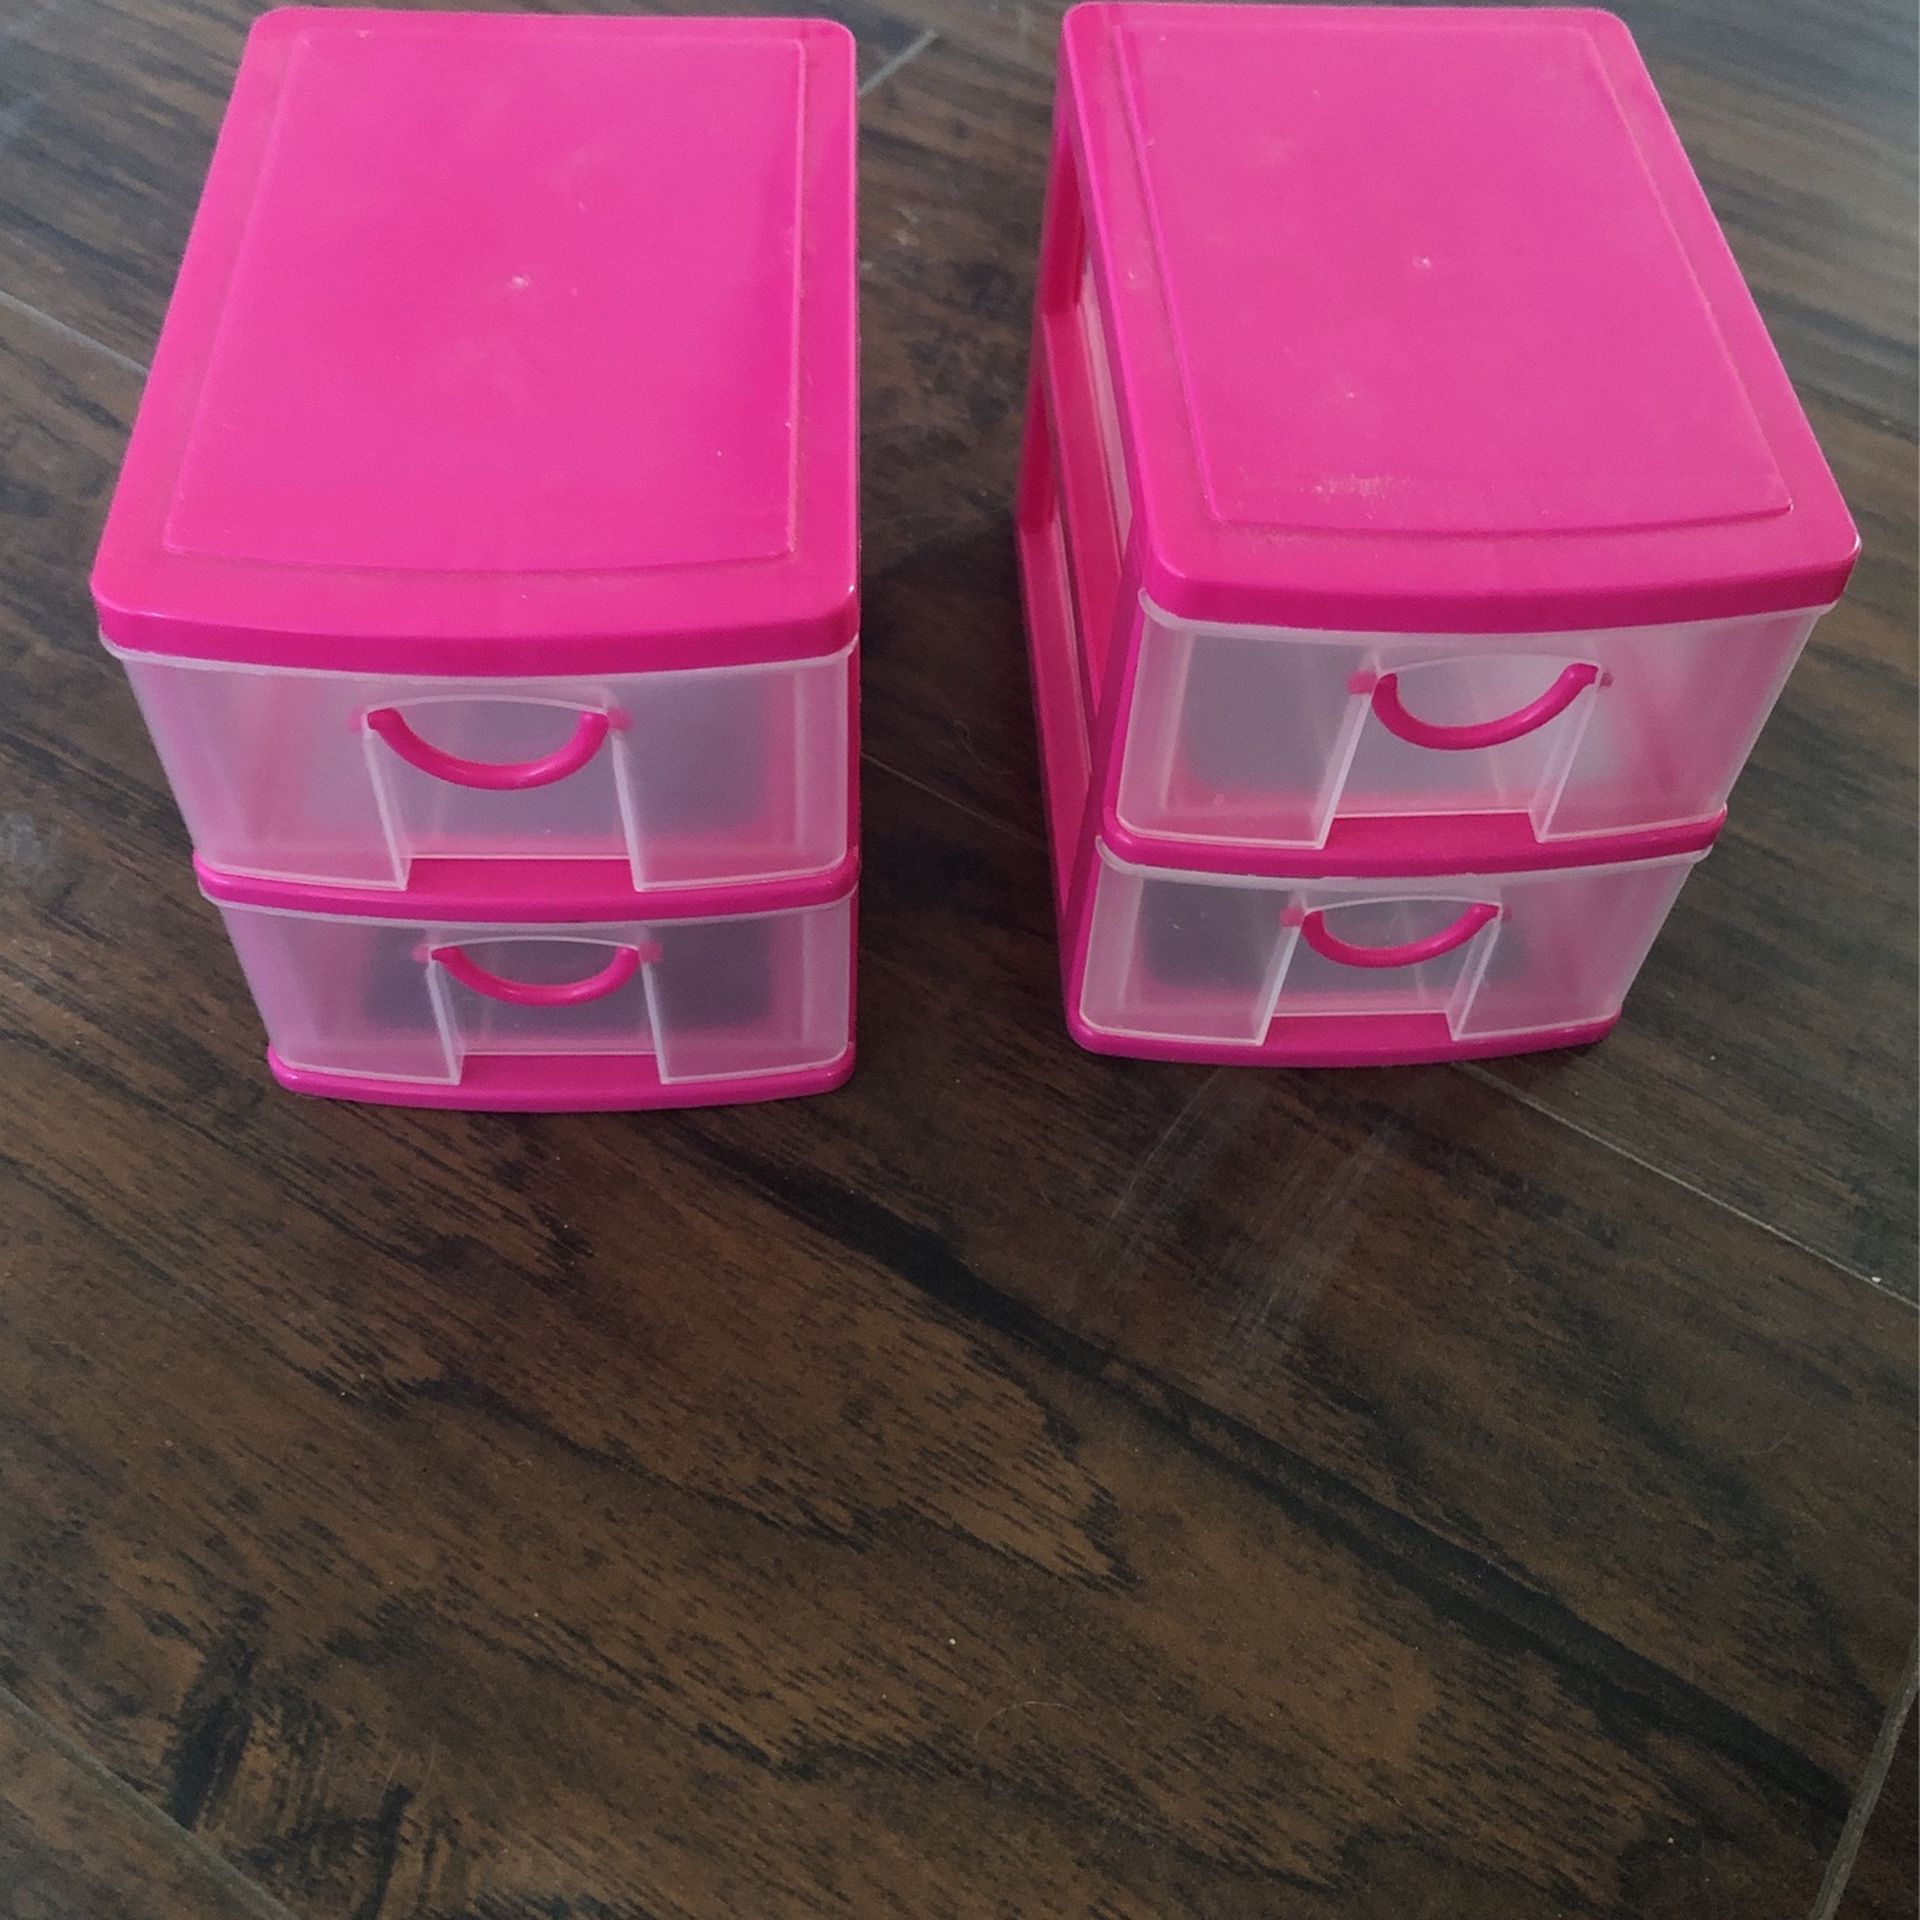 $2 For Both Mini Containers